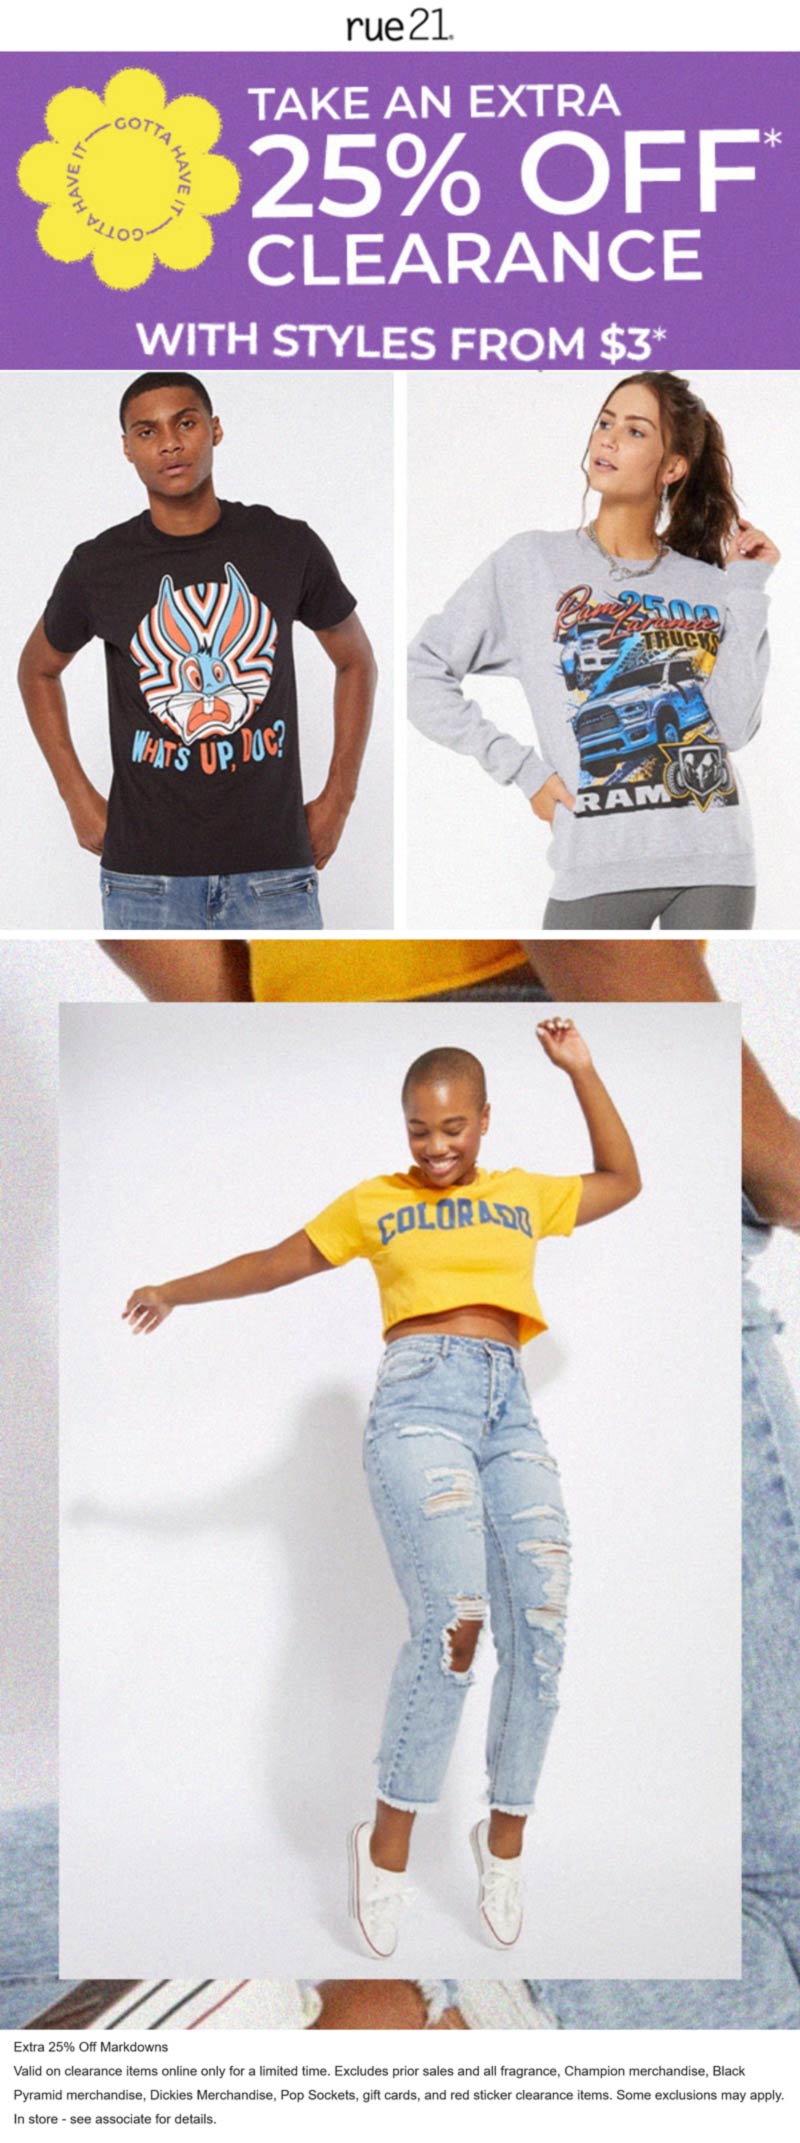 rue21 stores Coupon  Extra 25% off clearance at rue21 #rue21 